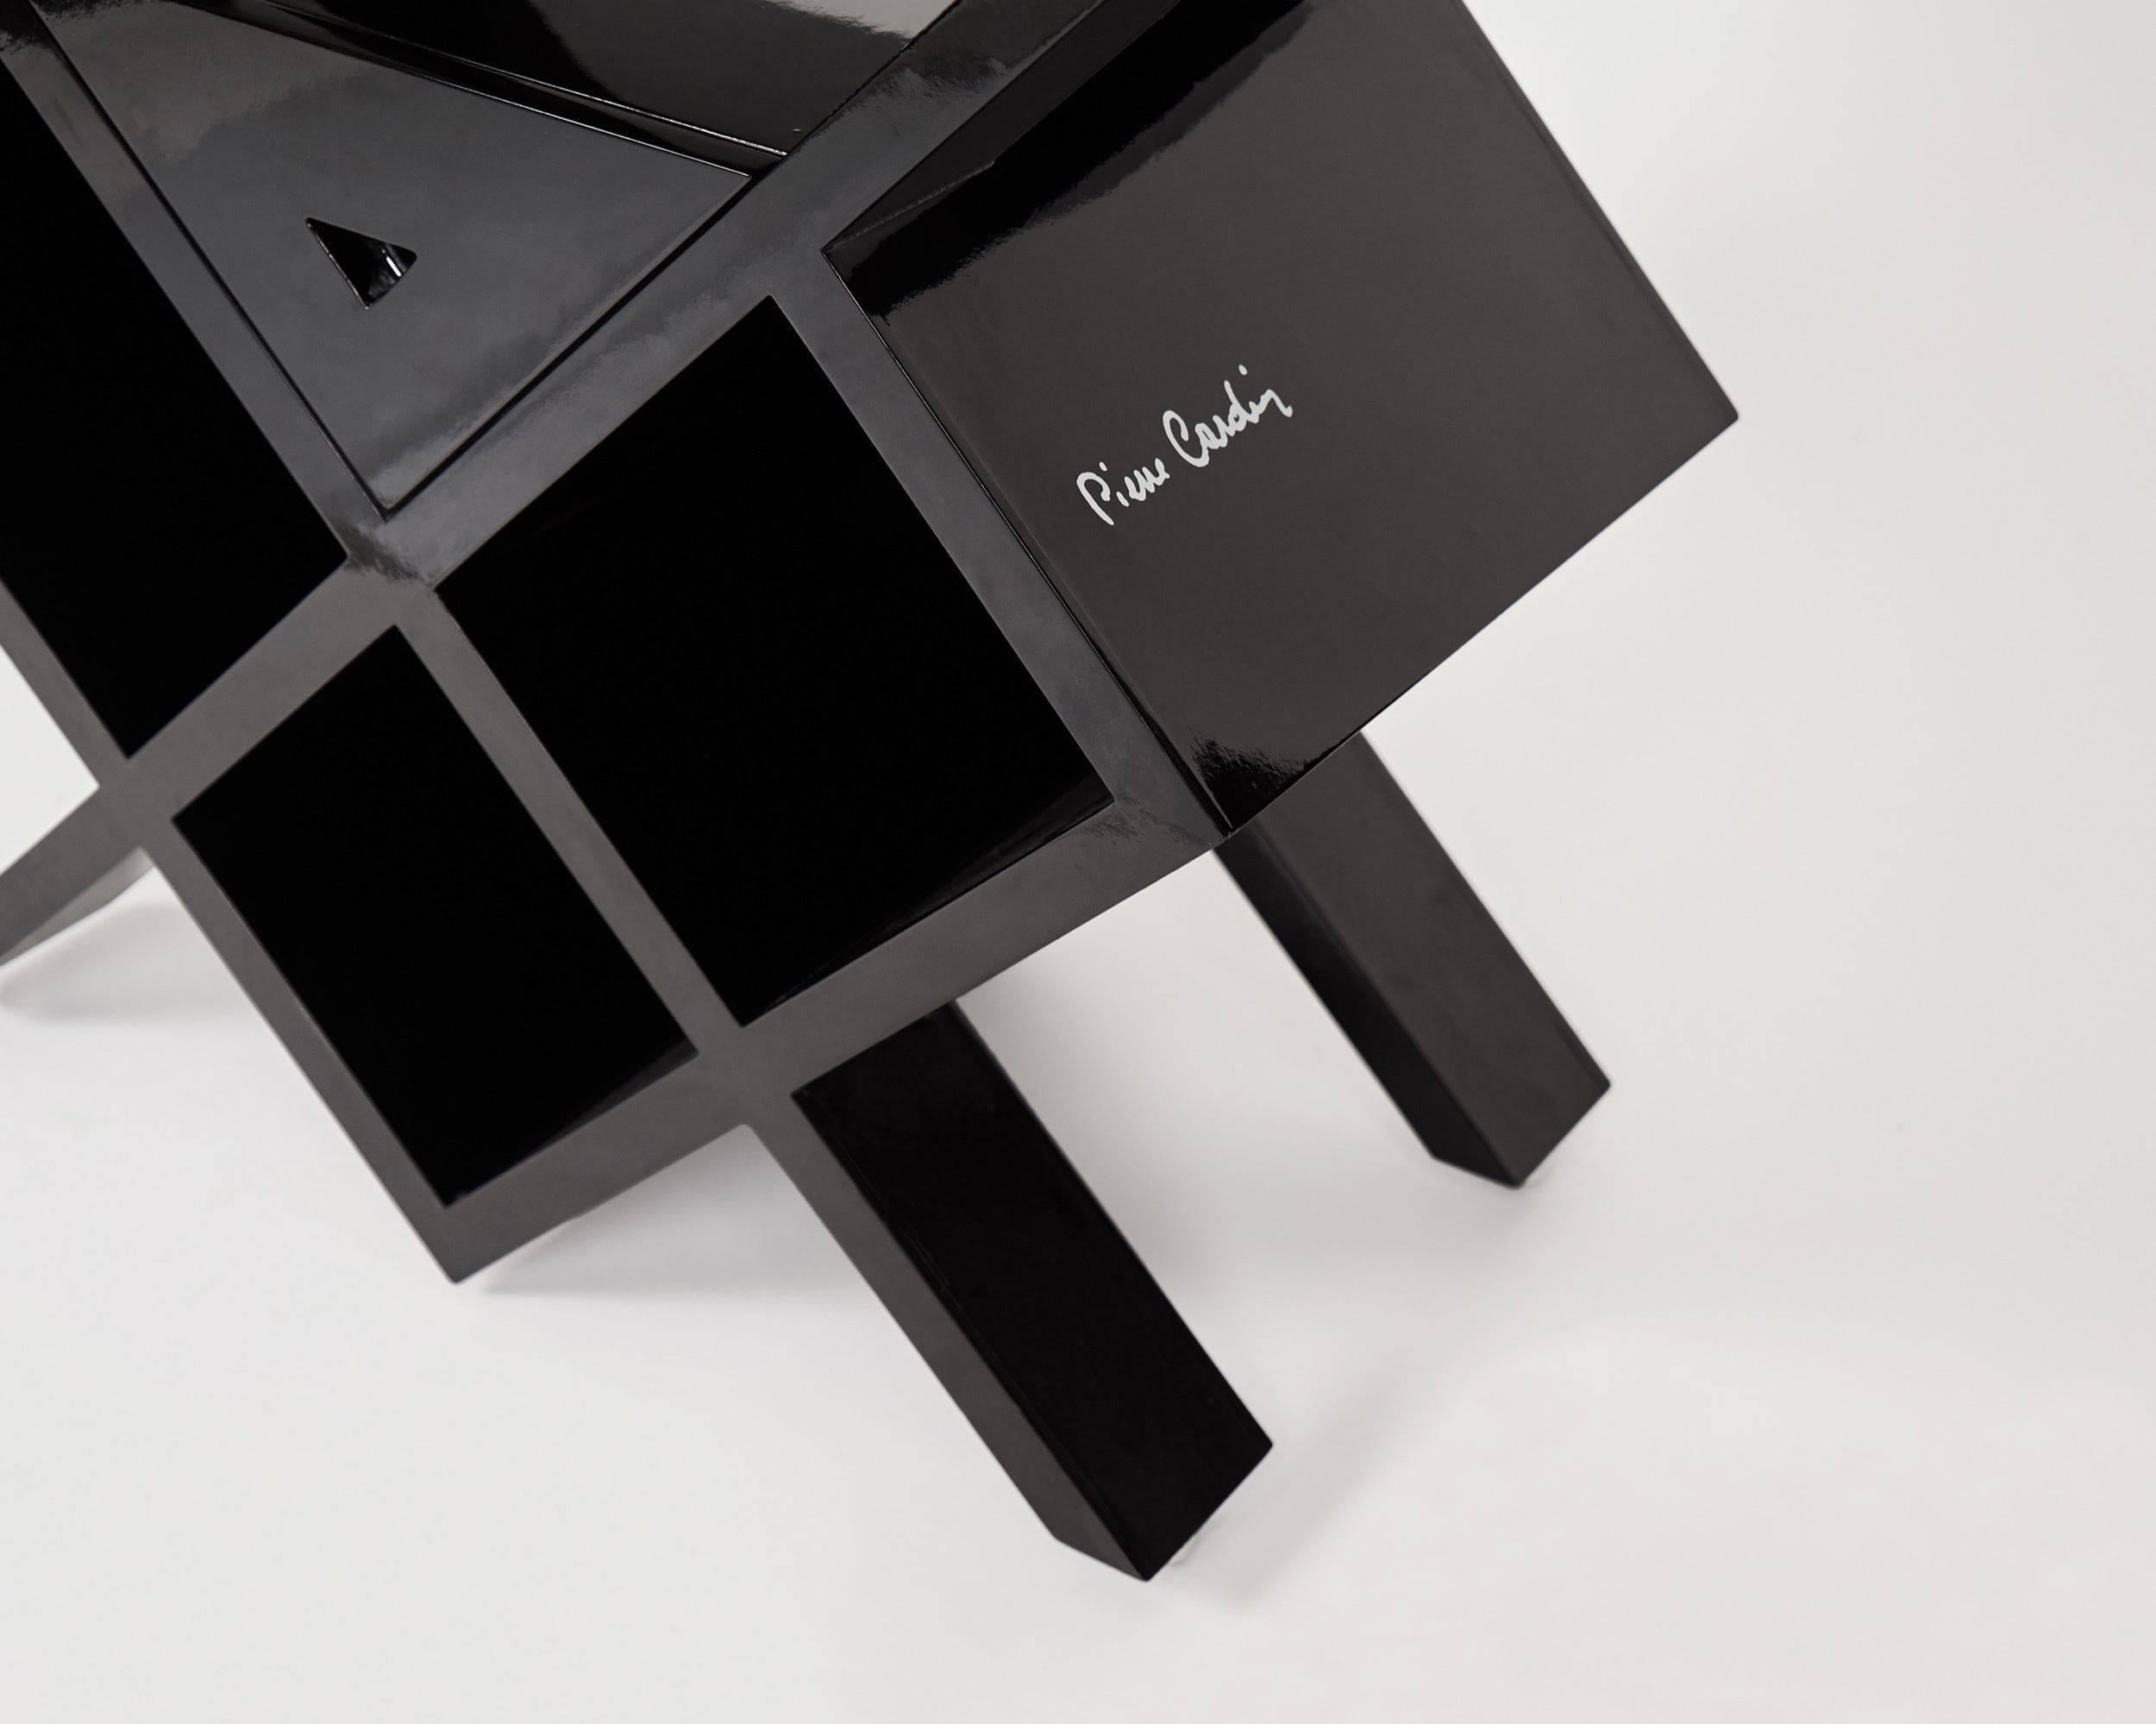 A black, polished side table with shelving by designer Pierre Cardin.